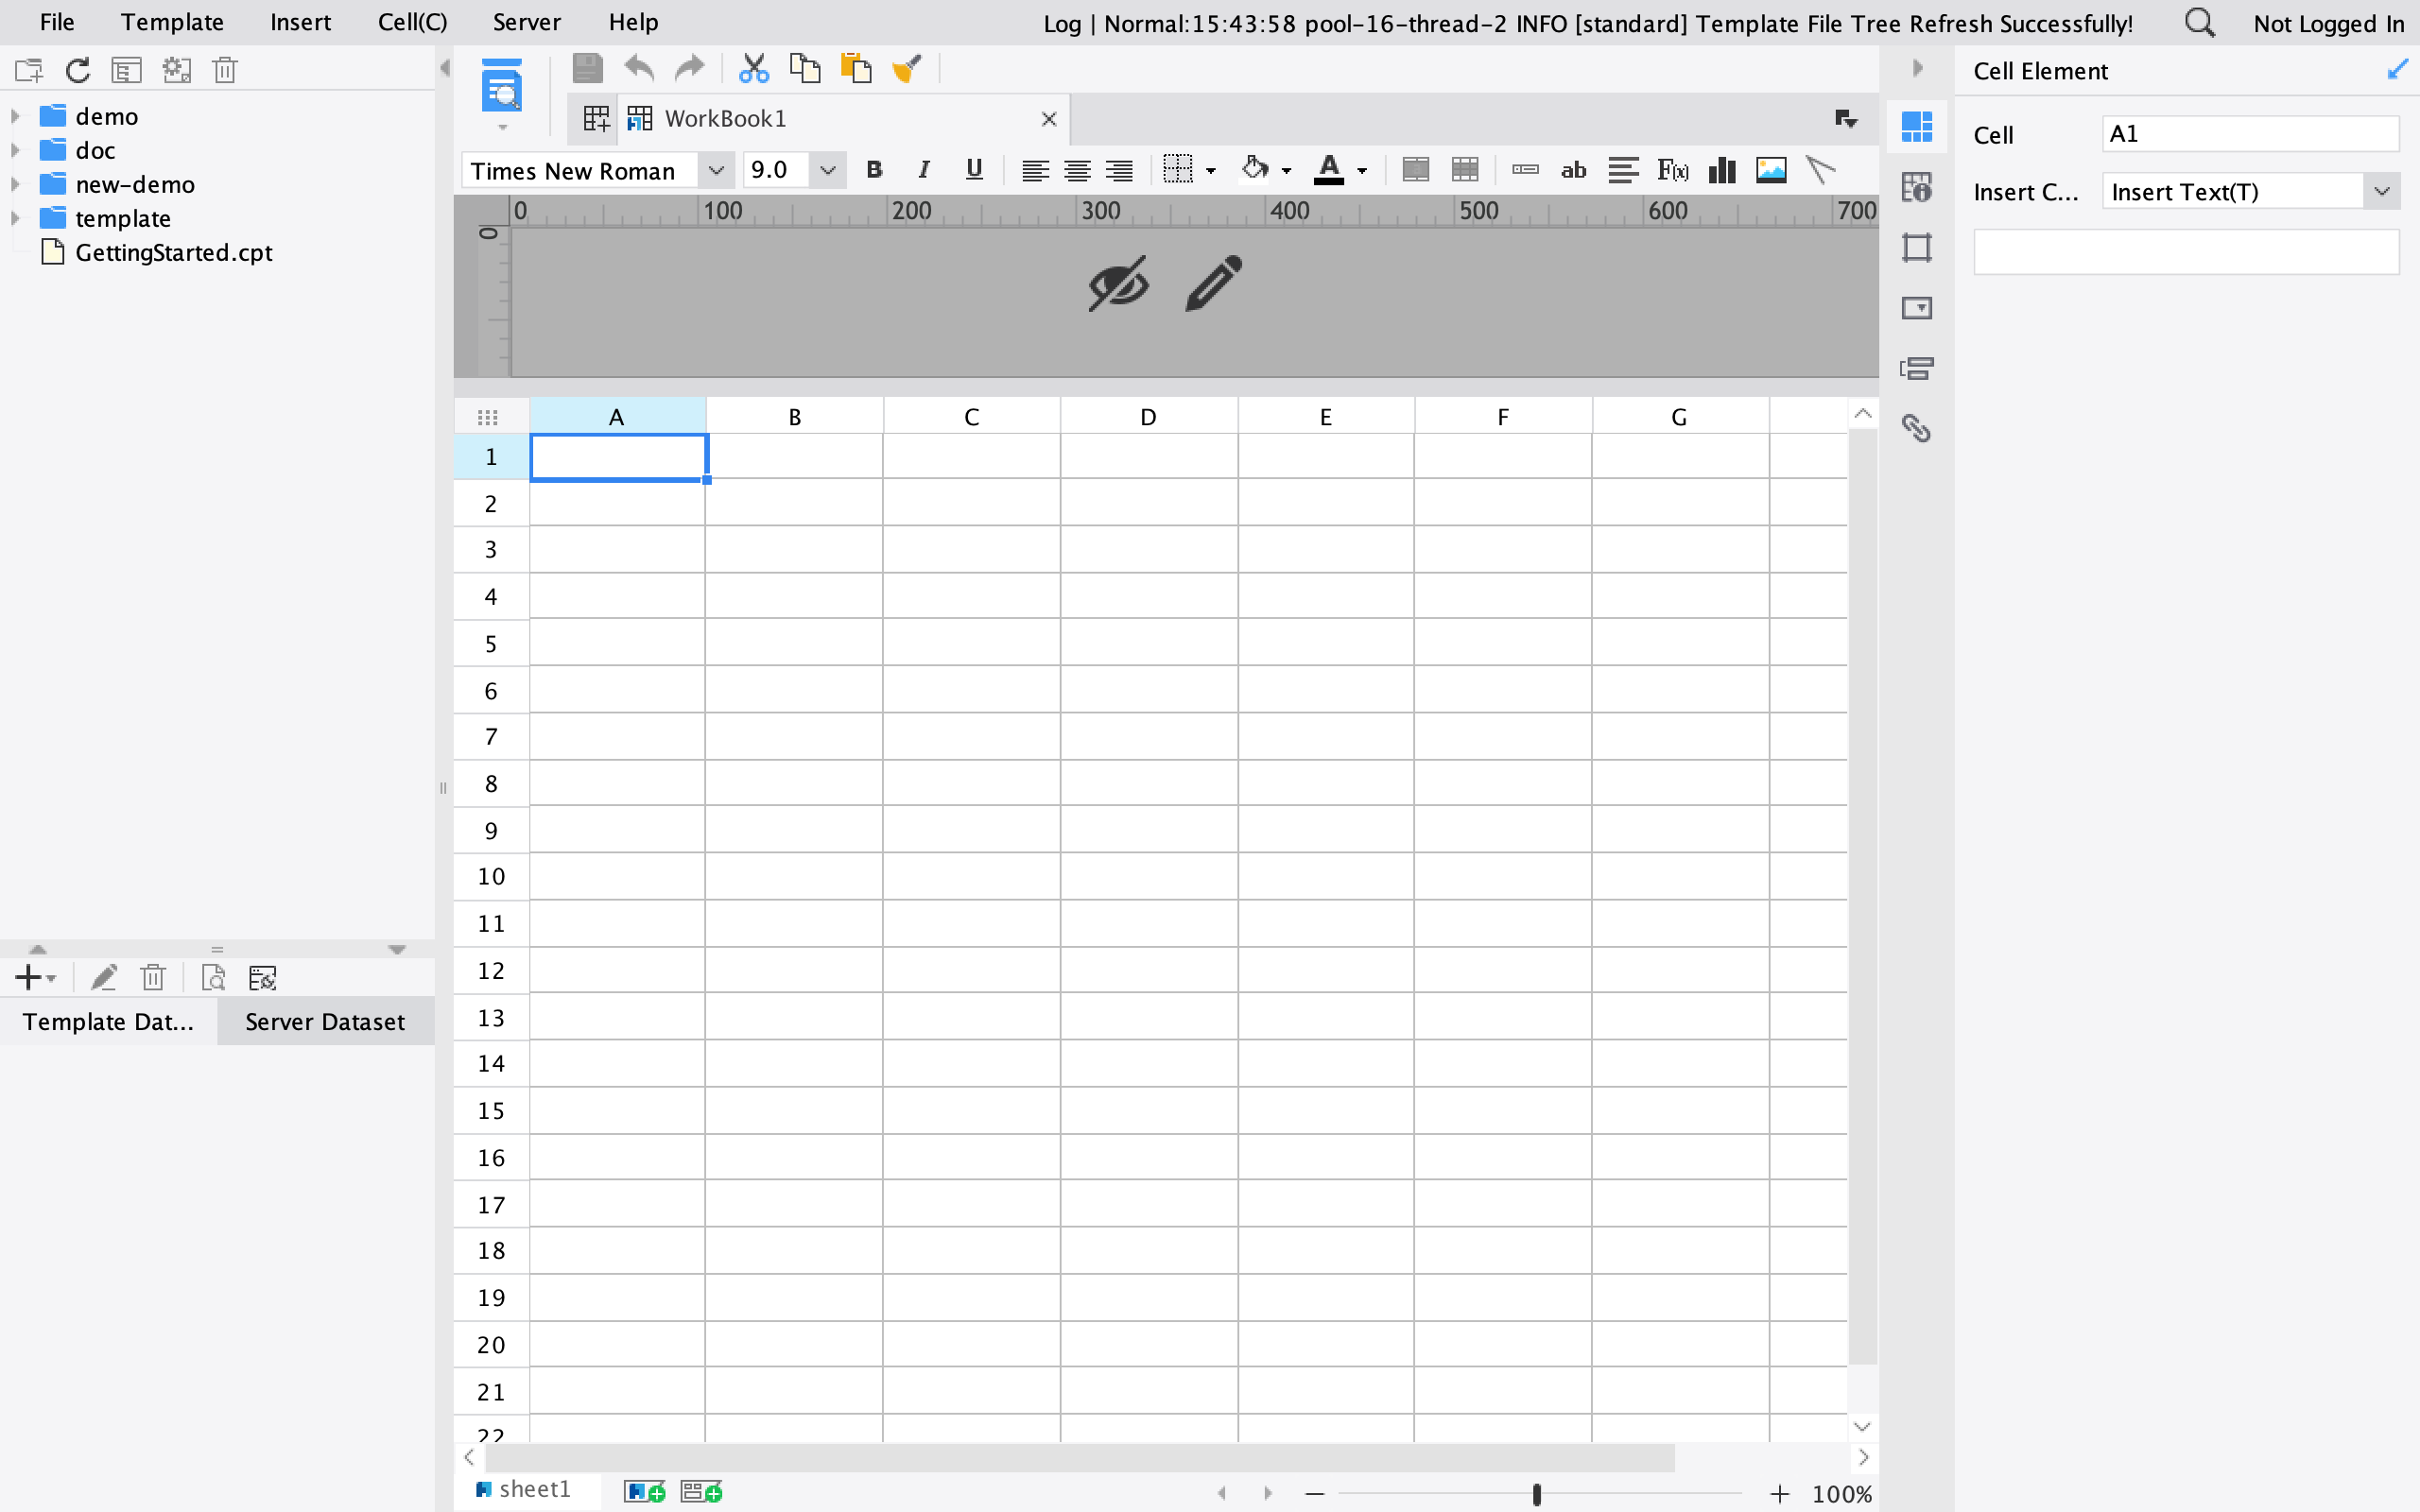 excel reporting tool interface